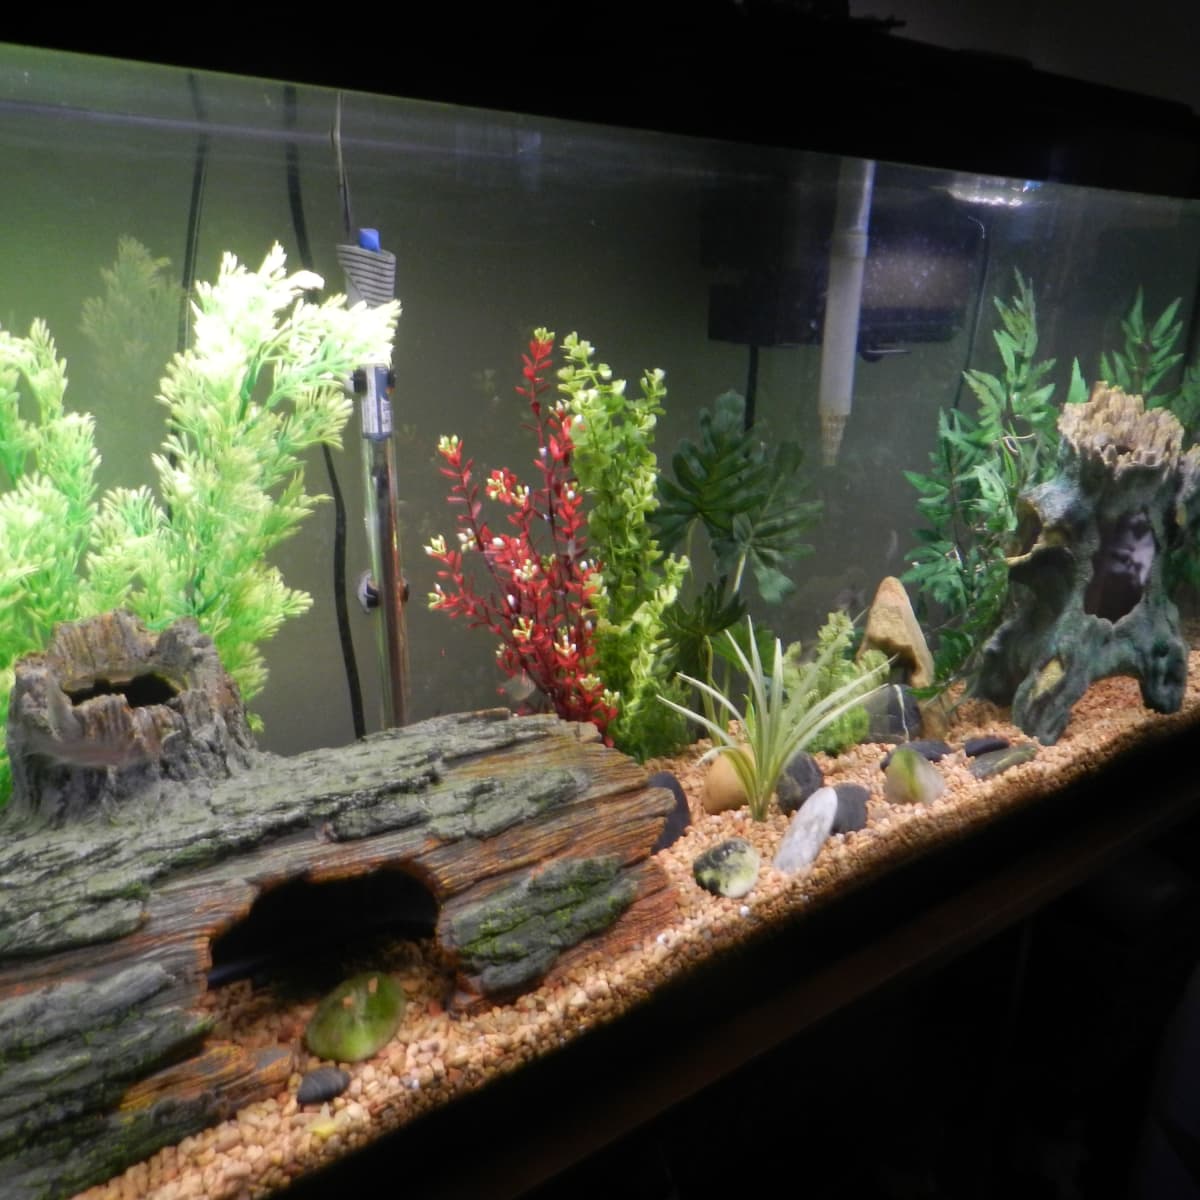 How to Clean a Dirty Fish Tank the Right Way